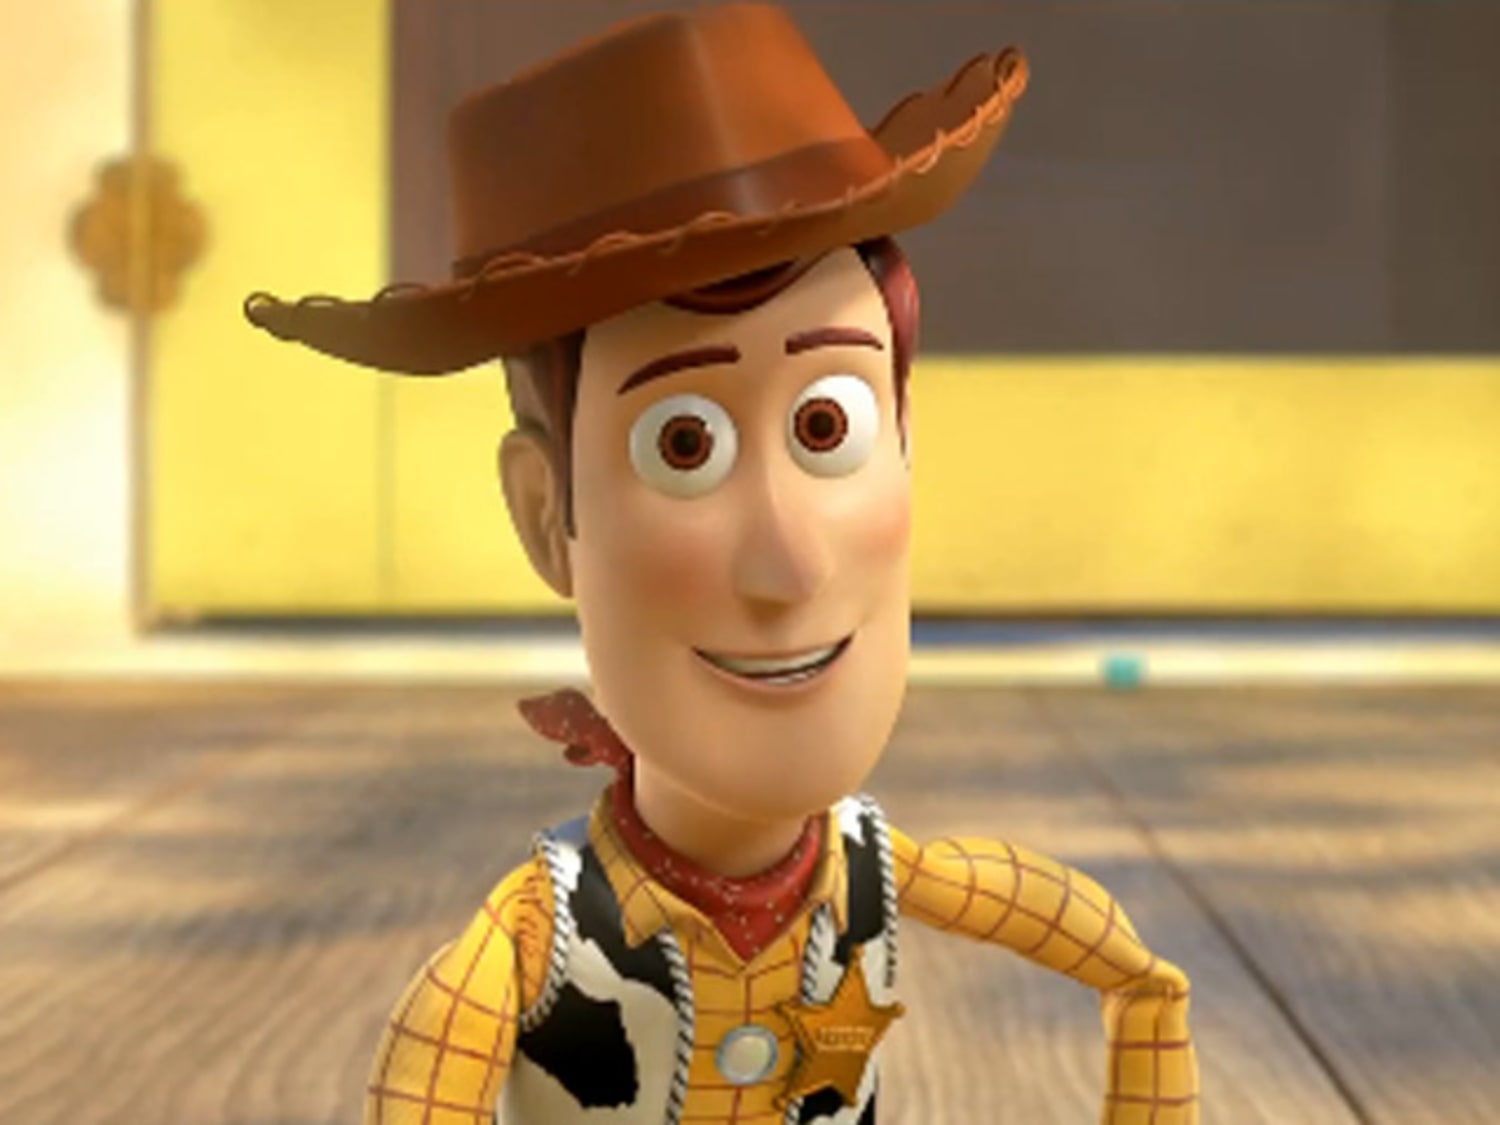 Toy Story's Woody bullied by anti-gay leader